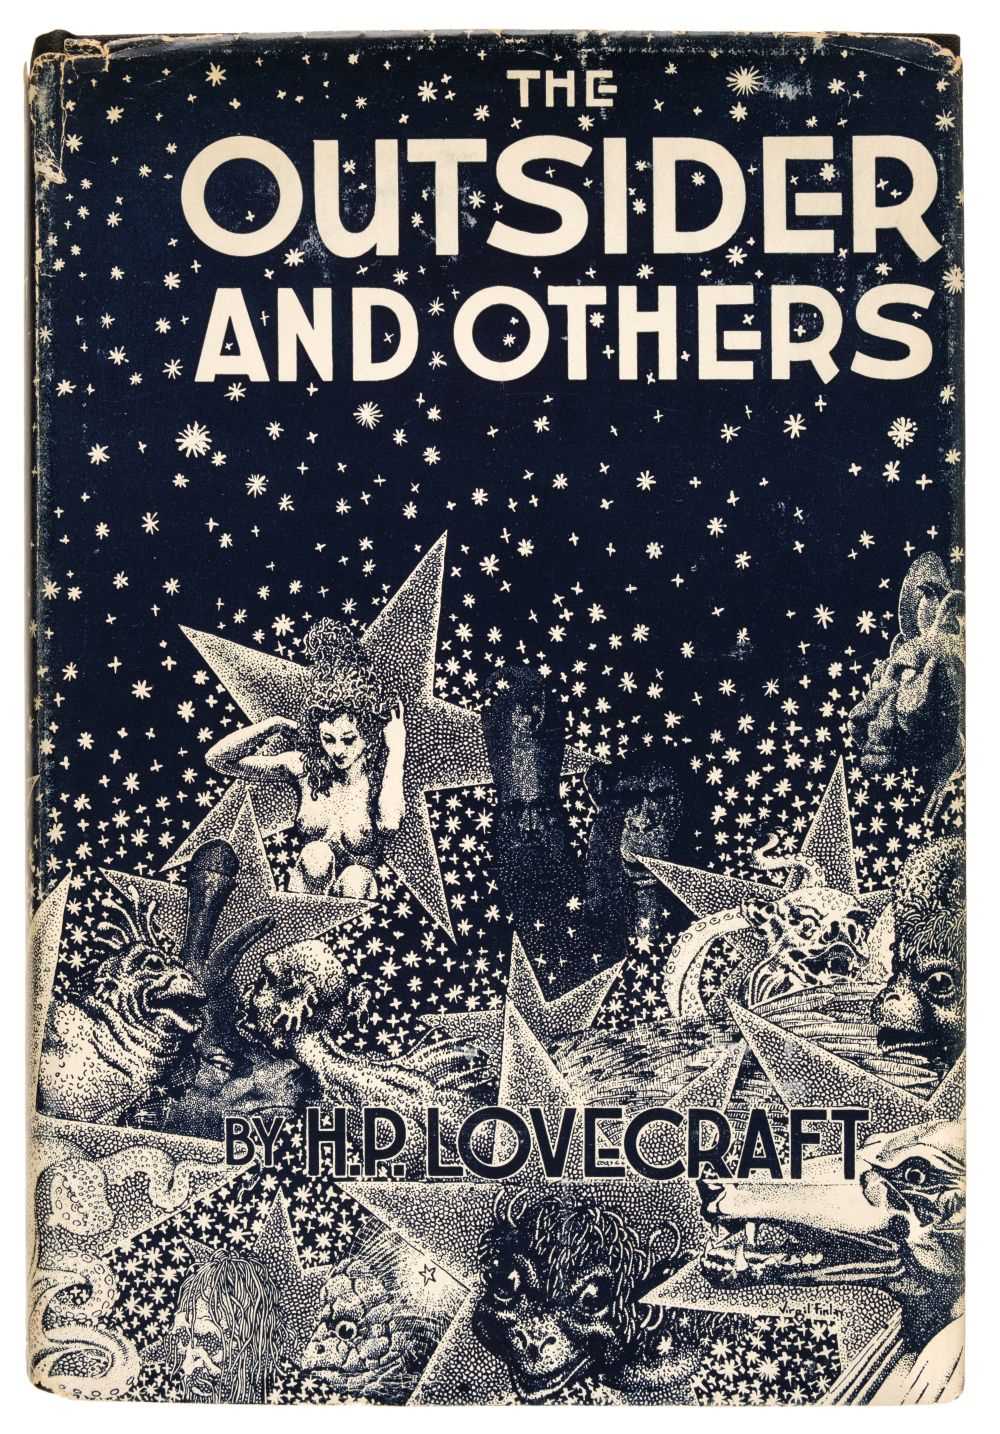 Lot 941 - Lovecraft (H.P.) The Outsider and Others, 1st edition, 1939